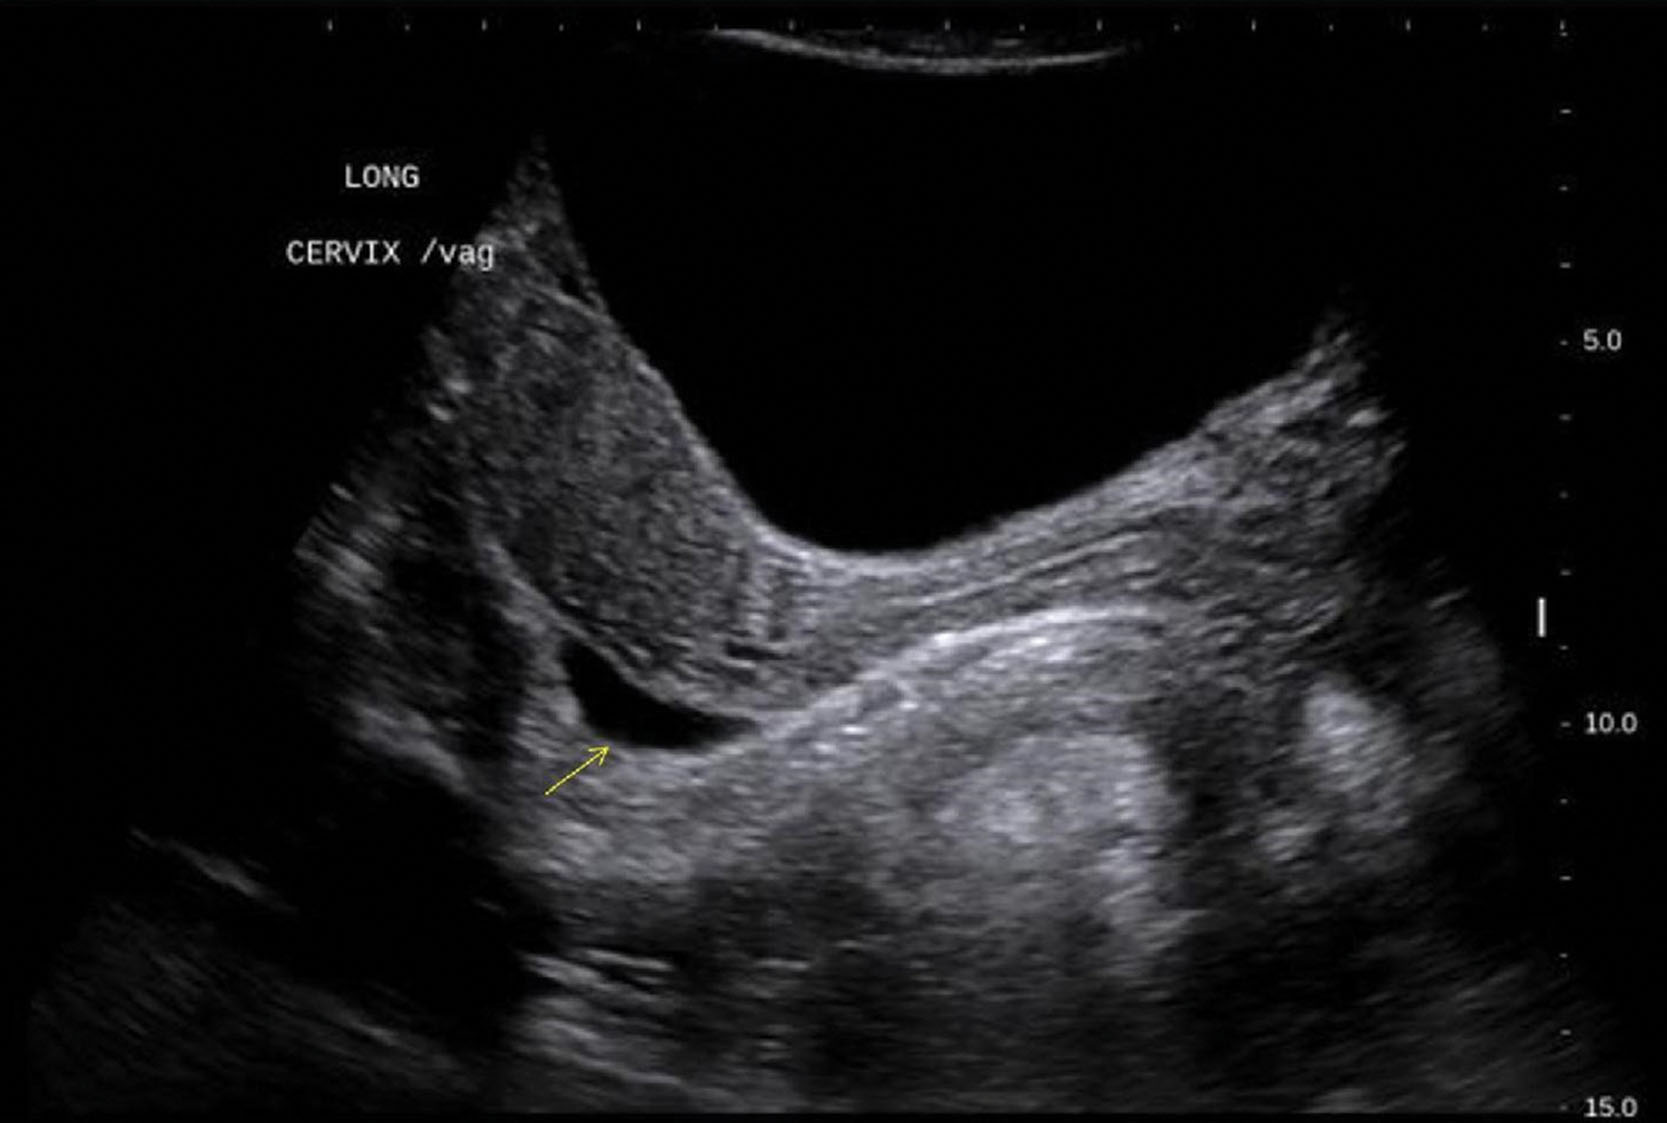 Fig. 43.3, The rectouterine recess (posterior cul-de-sac) is the most posterior and inferior reflection of the peritoneal cavity and is located between the rectum and uterus (also called the pouch of Douglas). Because of its location, it is frequently the site of intraperitoneal fluid collections. Pathologic fluid collections may be associated with ascites, blood resulting from a ruptured ectopic pregnancy, hemorrhagic cyst, or pus resulting from an infection.